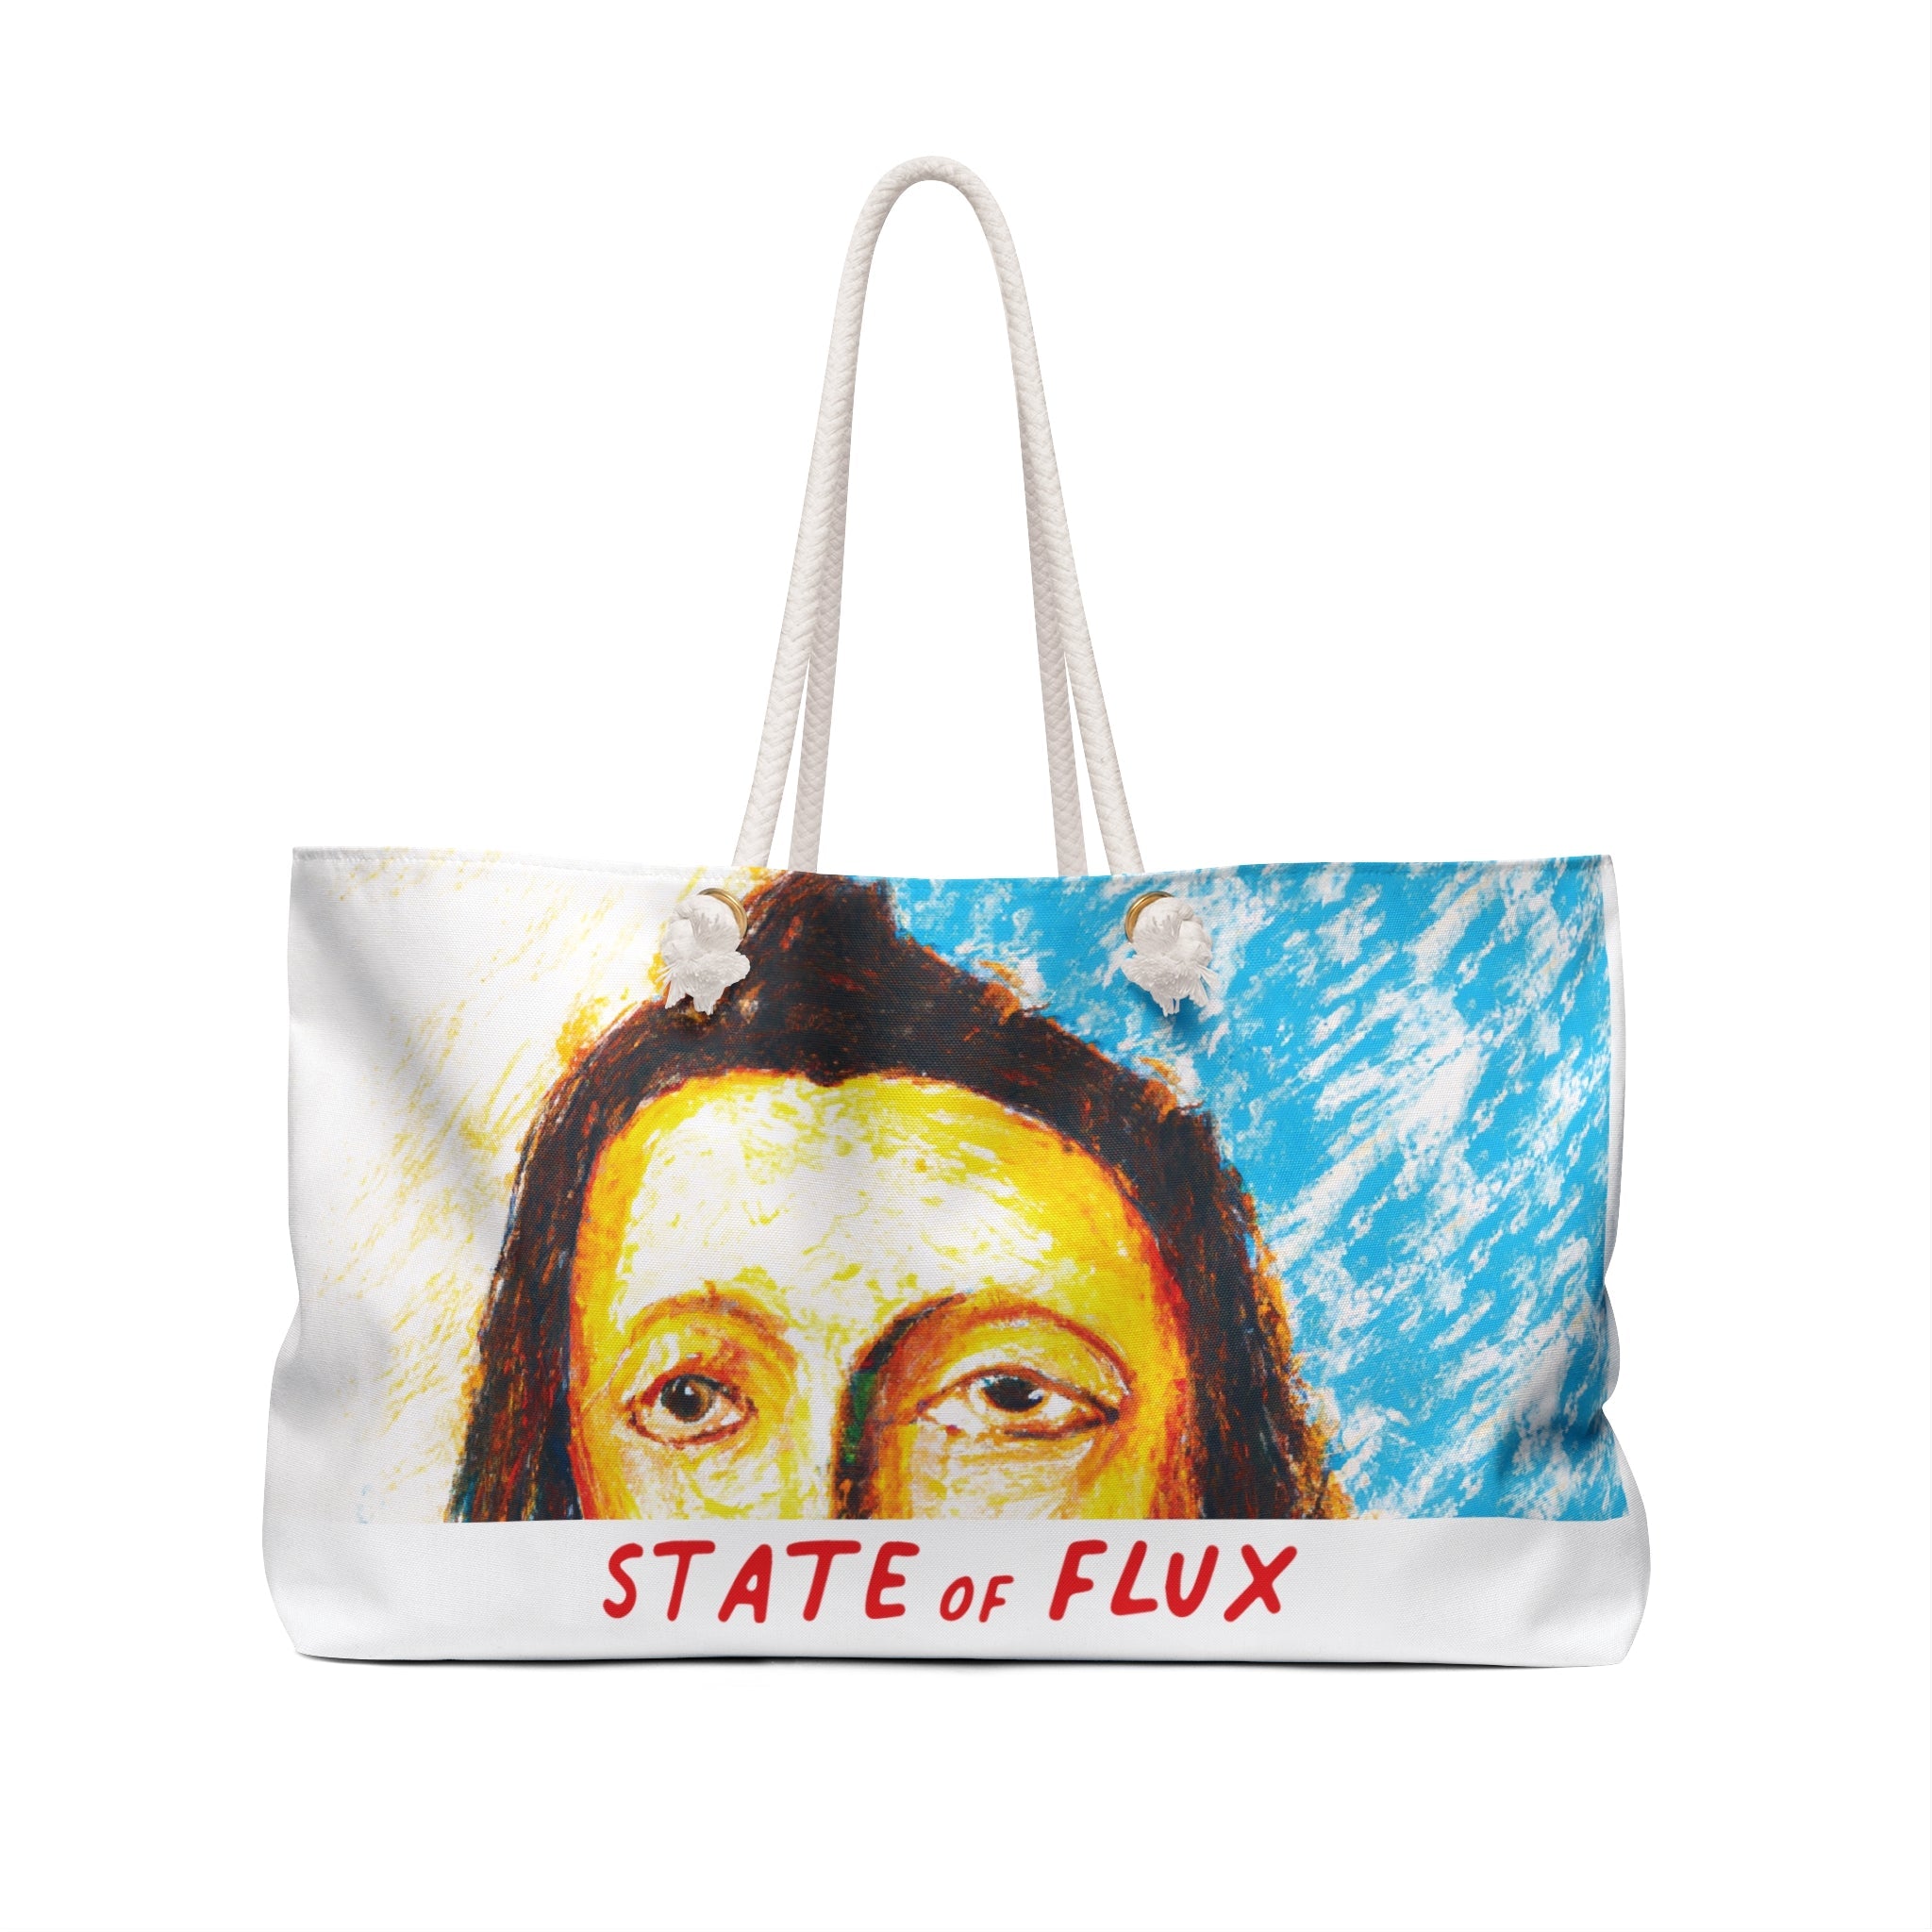 Beautiful Art Tote Bag in white - State Of Flux - State Of Flux